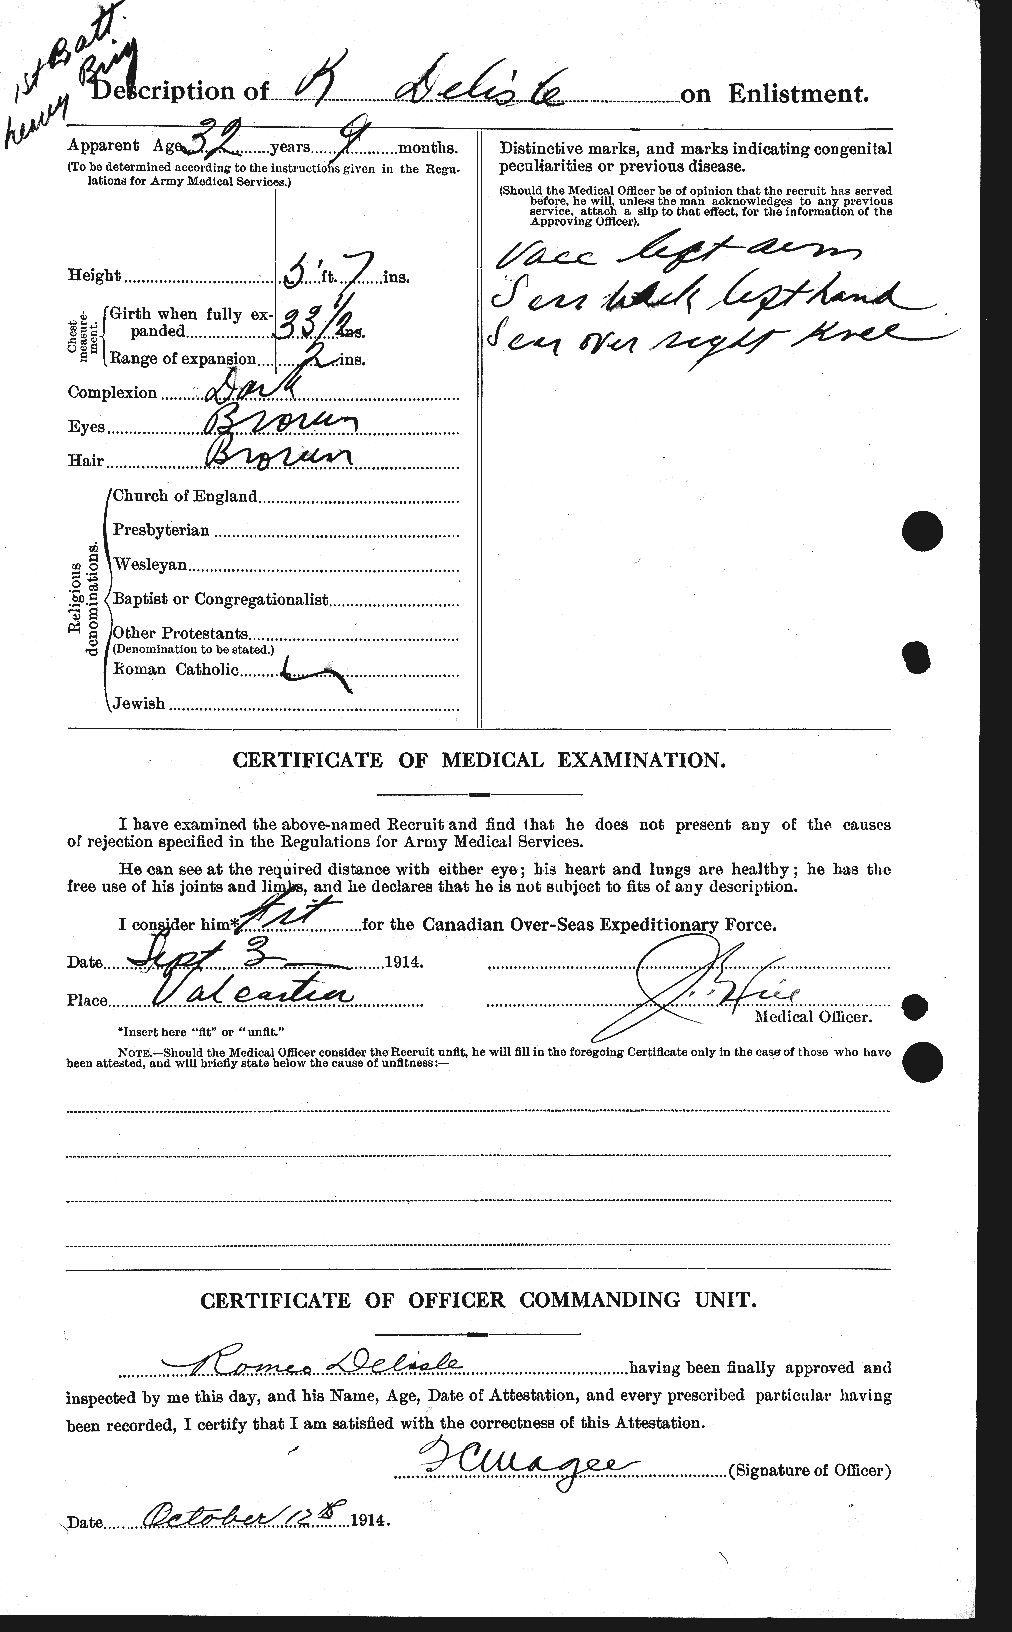 Personnel Records of the First World War - CEF 286643b